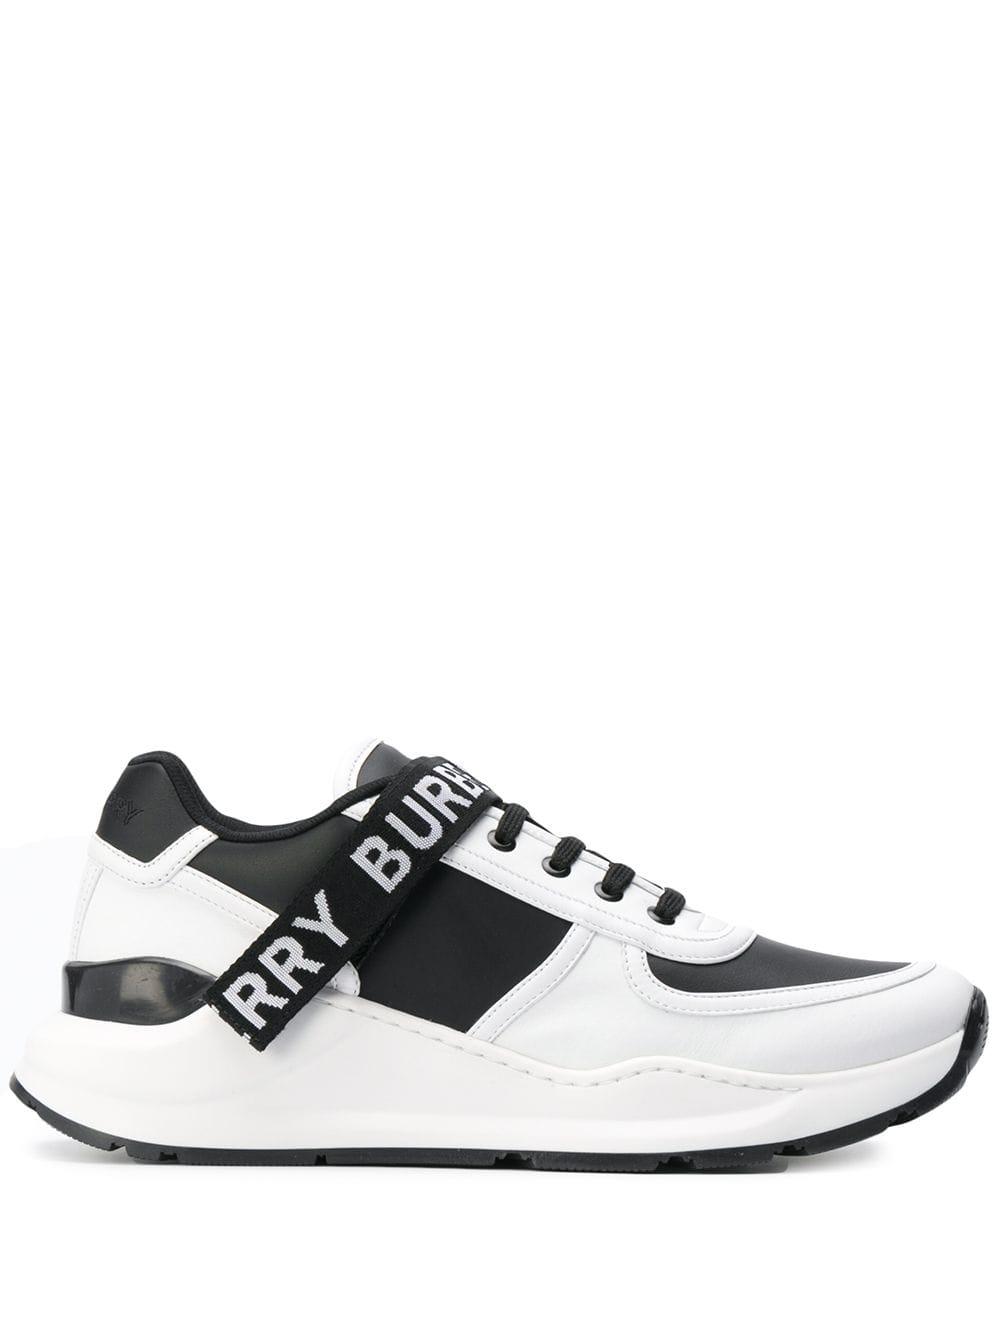 Burberry Logo Detail Leather And Nylon Sneakers in Black for Men 